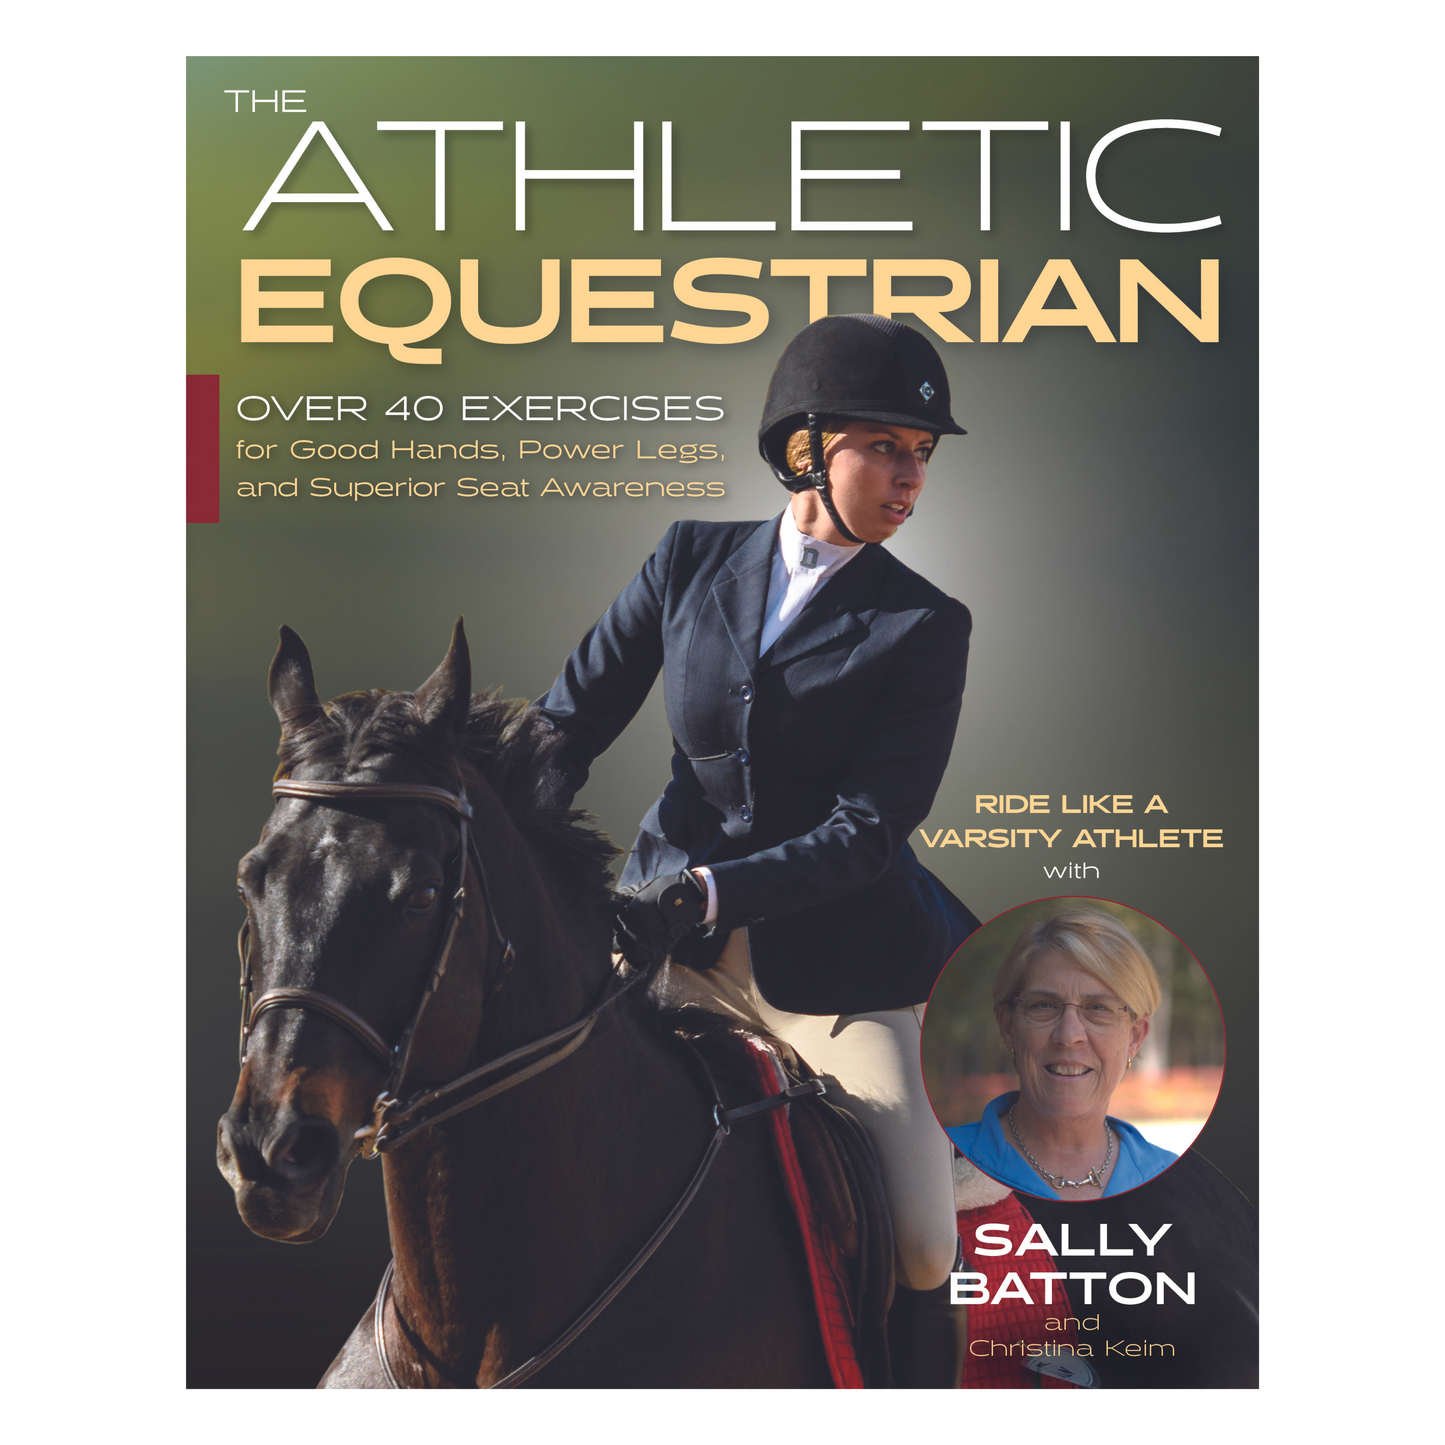 The Athletic Equestrian by Sally Batton with Christina Keim